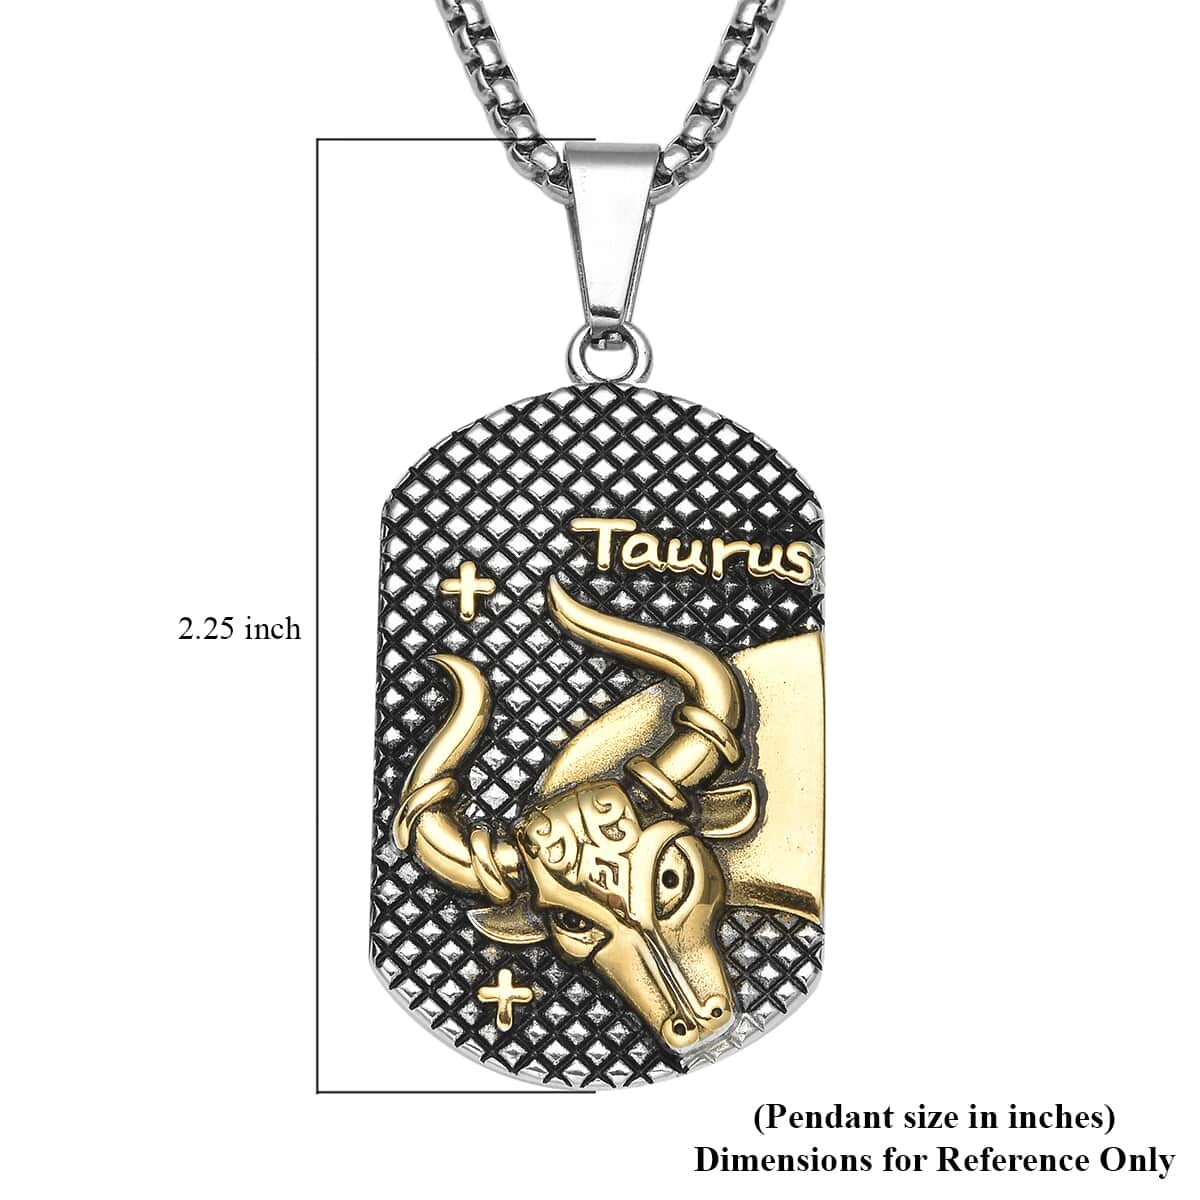 Taurus Dog Tag Jewelry Gift Box Pendant Necklace 23.5 Inches in ION Plated YG and Black Oxidized Stainless Steel image number 4